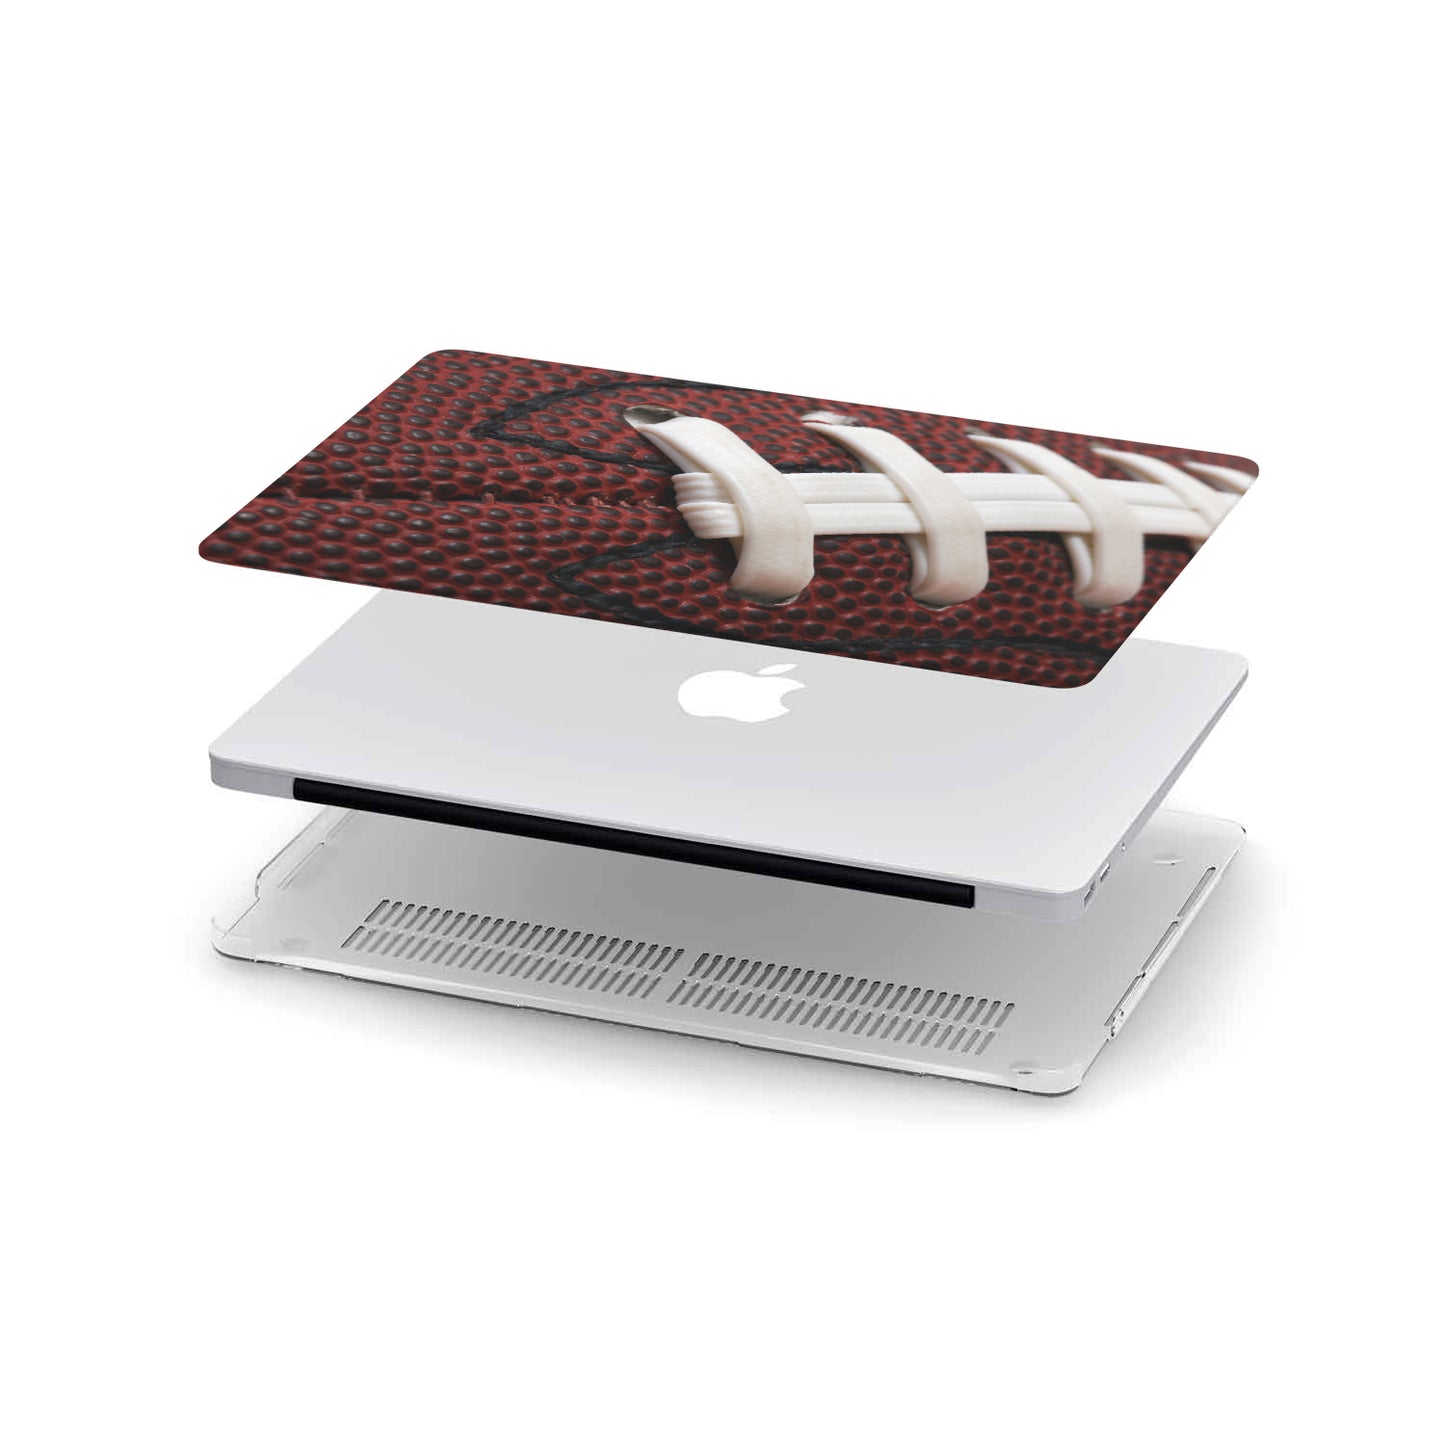 Personalized Macbook Hard Shell Case - American Football